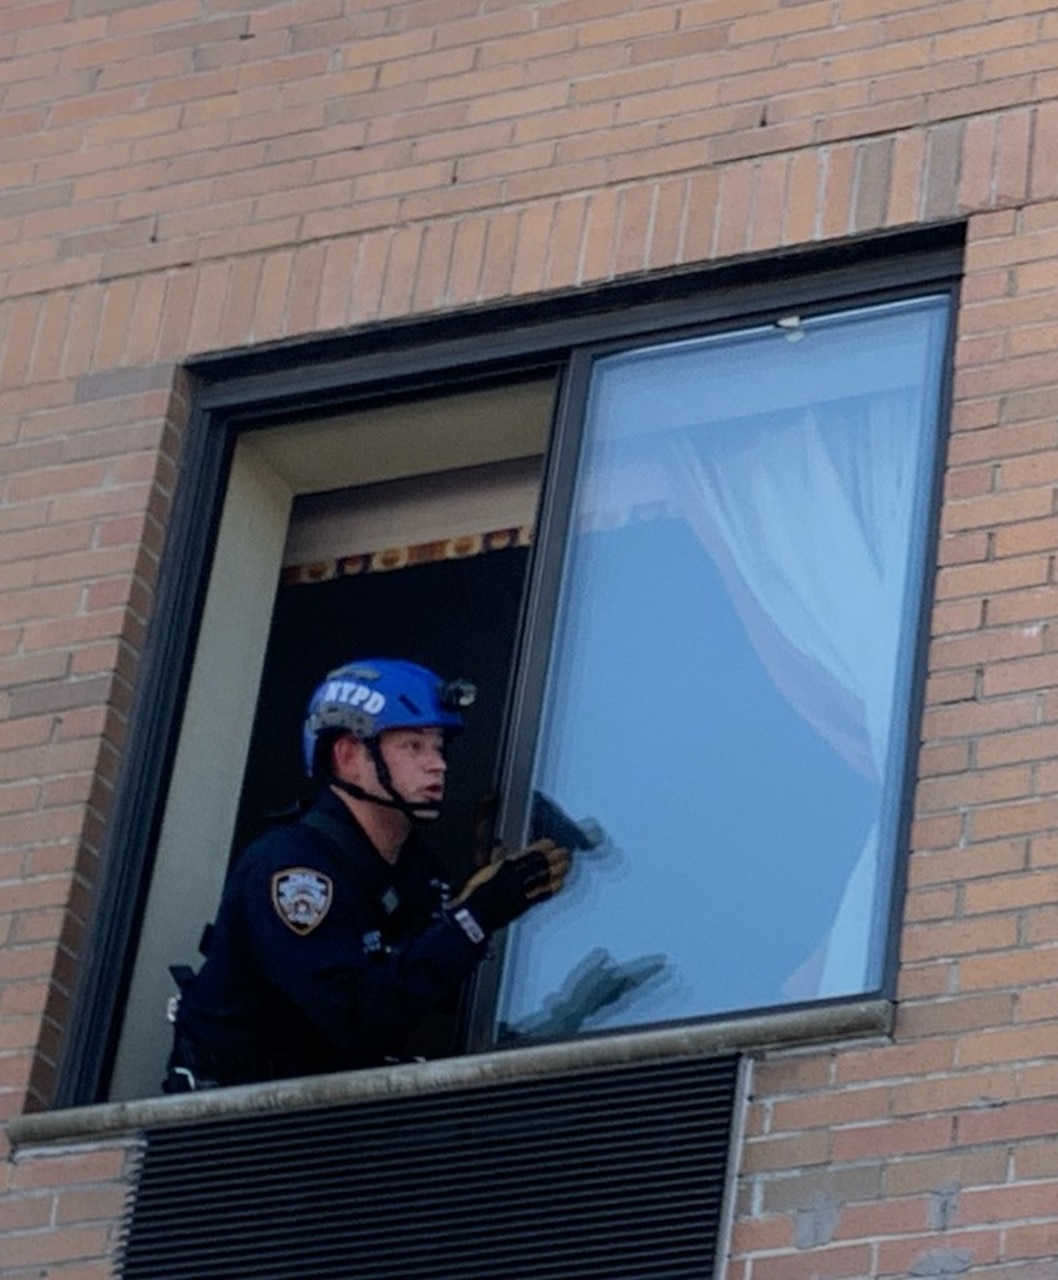 A man in an NYPD helmet talks to someone through an open window.